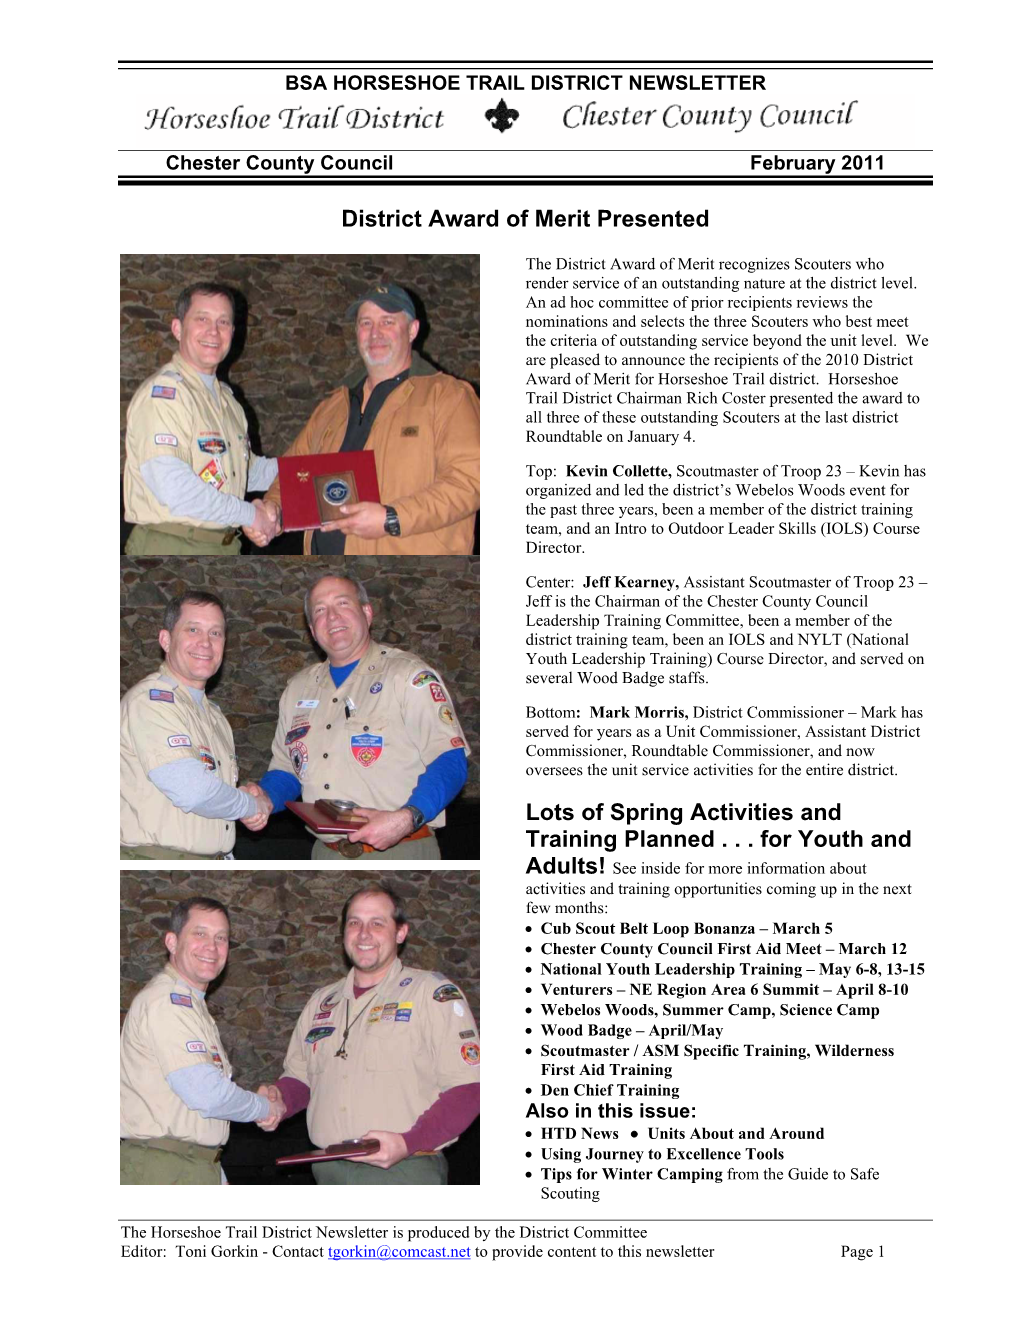 District Award of Merit Presented Lots of Spring Activities and Training Planned . . . for Youth